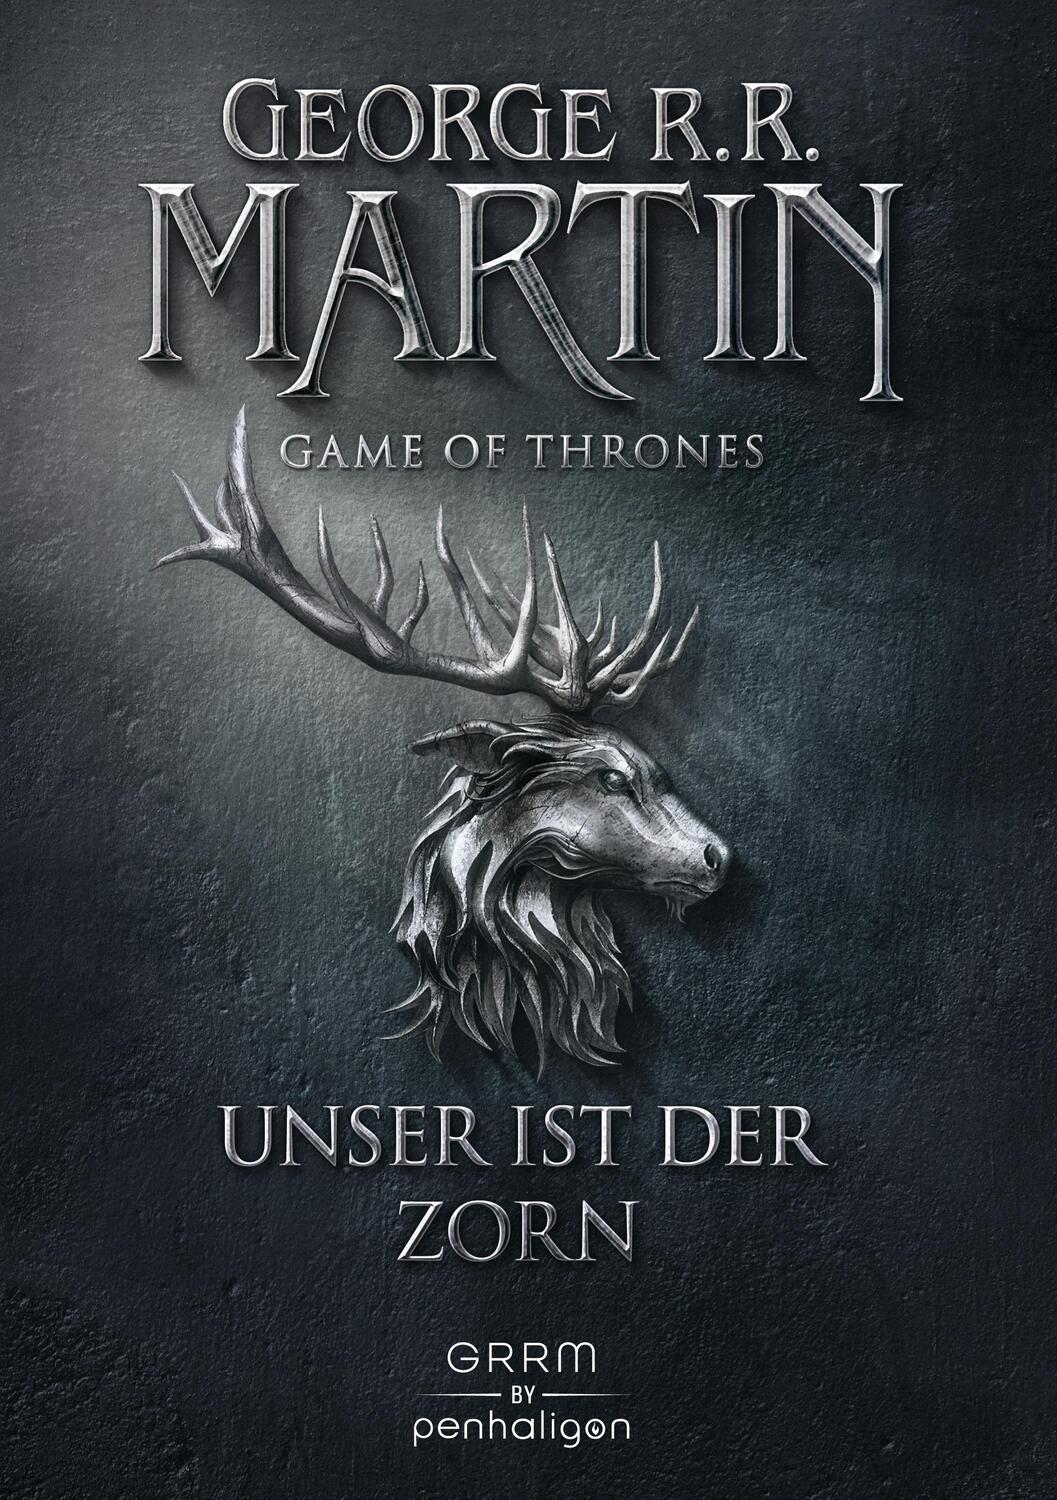 Game of Thrones 2 - Martin, George R. R.